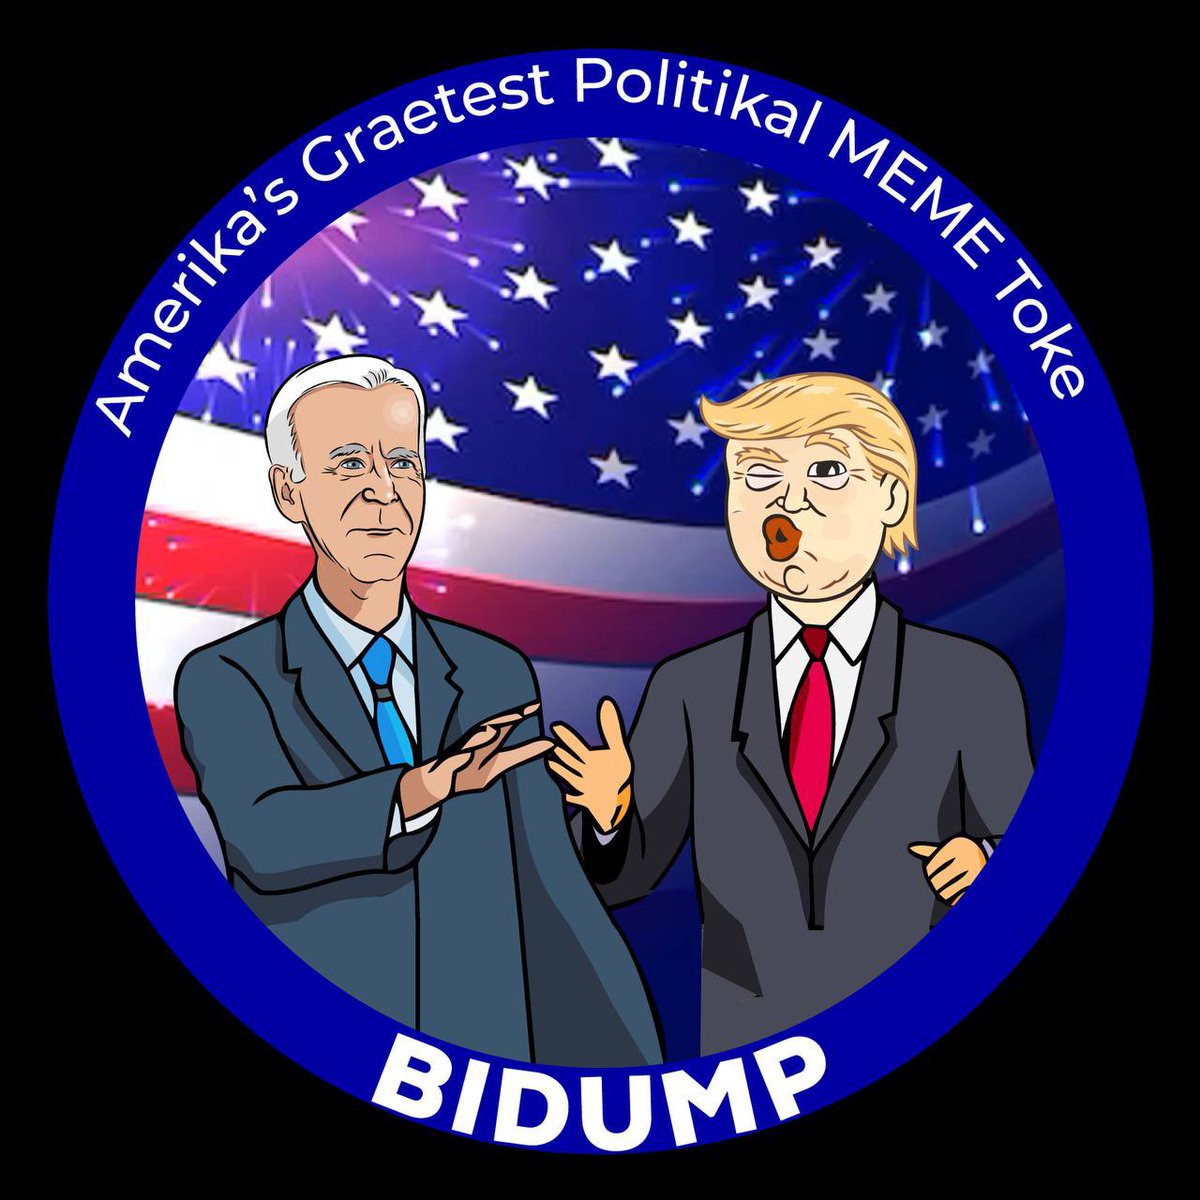 Meme coins are the new stable coin, among many different choices this voting season BIDUMP will be your easiest on SOL. 
CA: FVjTwEMb7DsaUajuiiQVKB38FS25PhkCiaiGPF5RnZbc
Hold it and it’s a policy that will see you through the hard times.